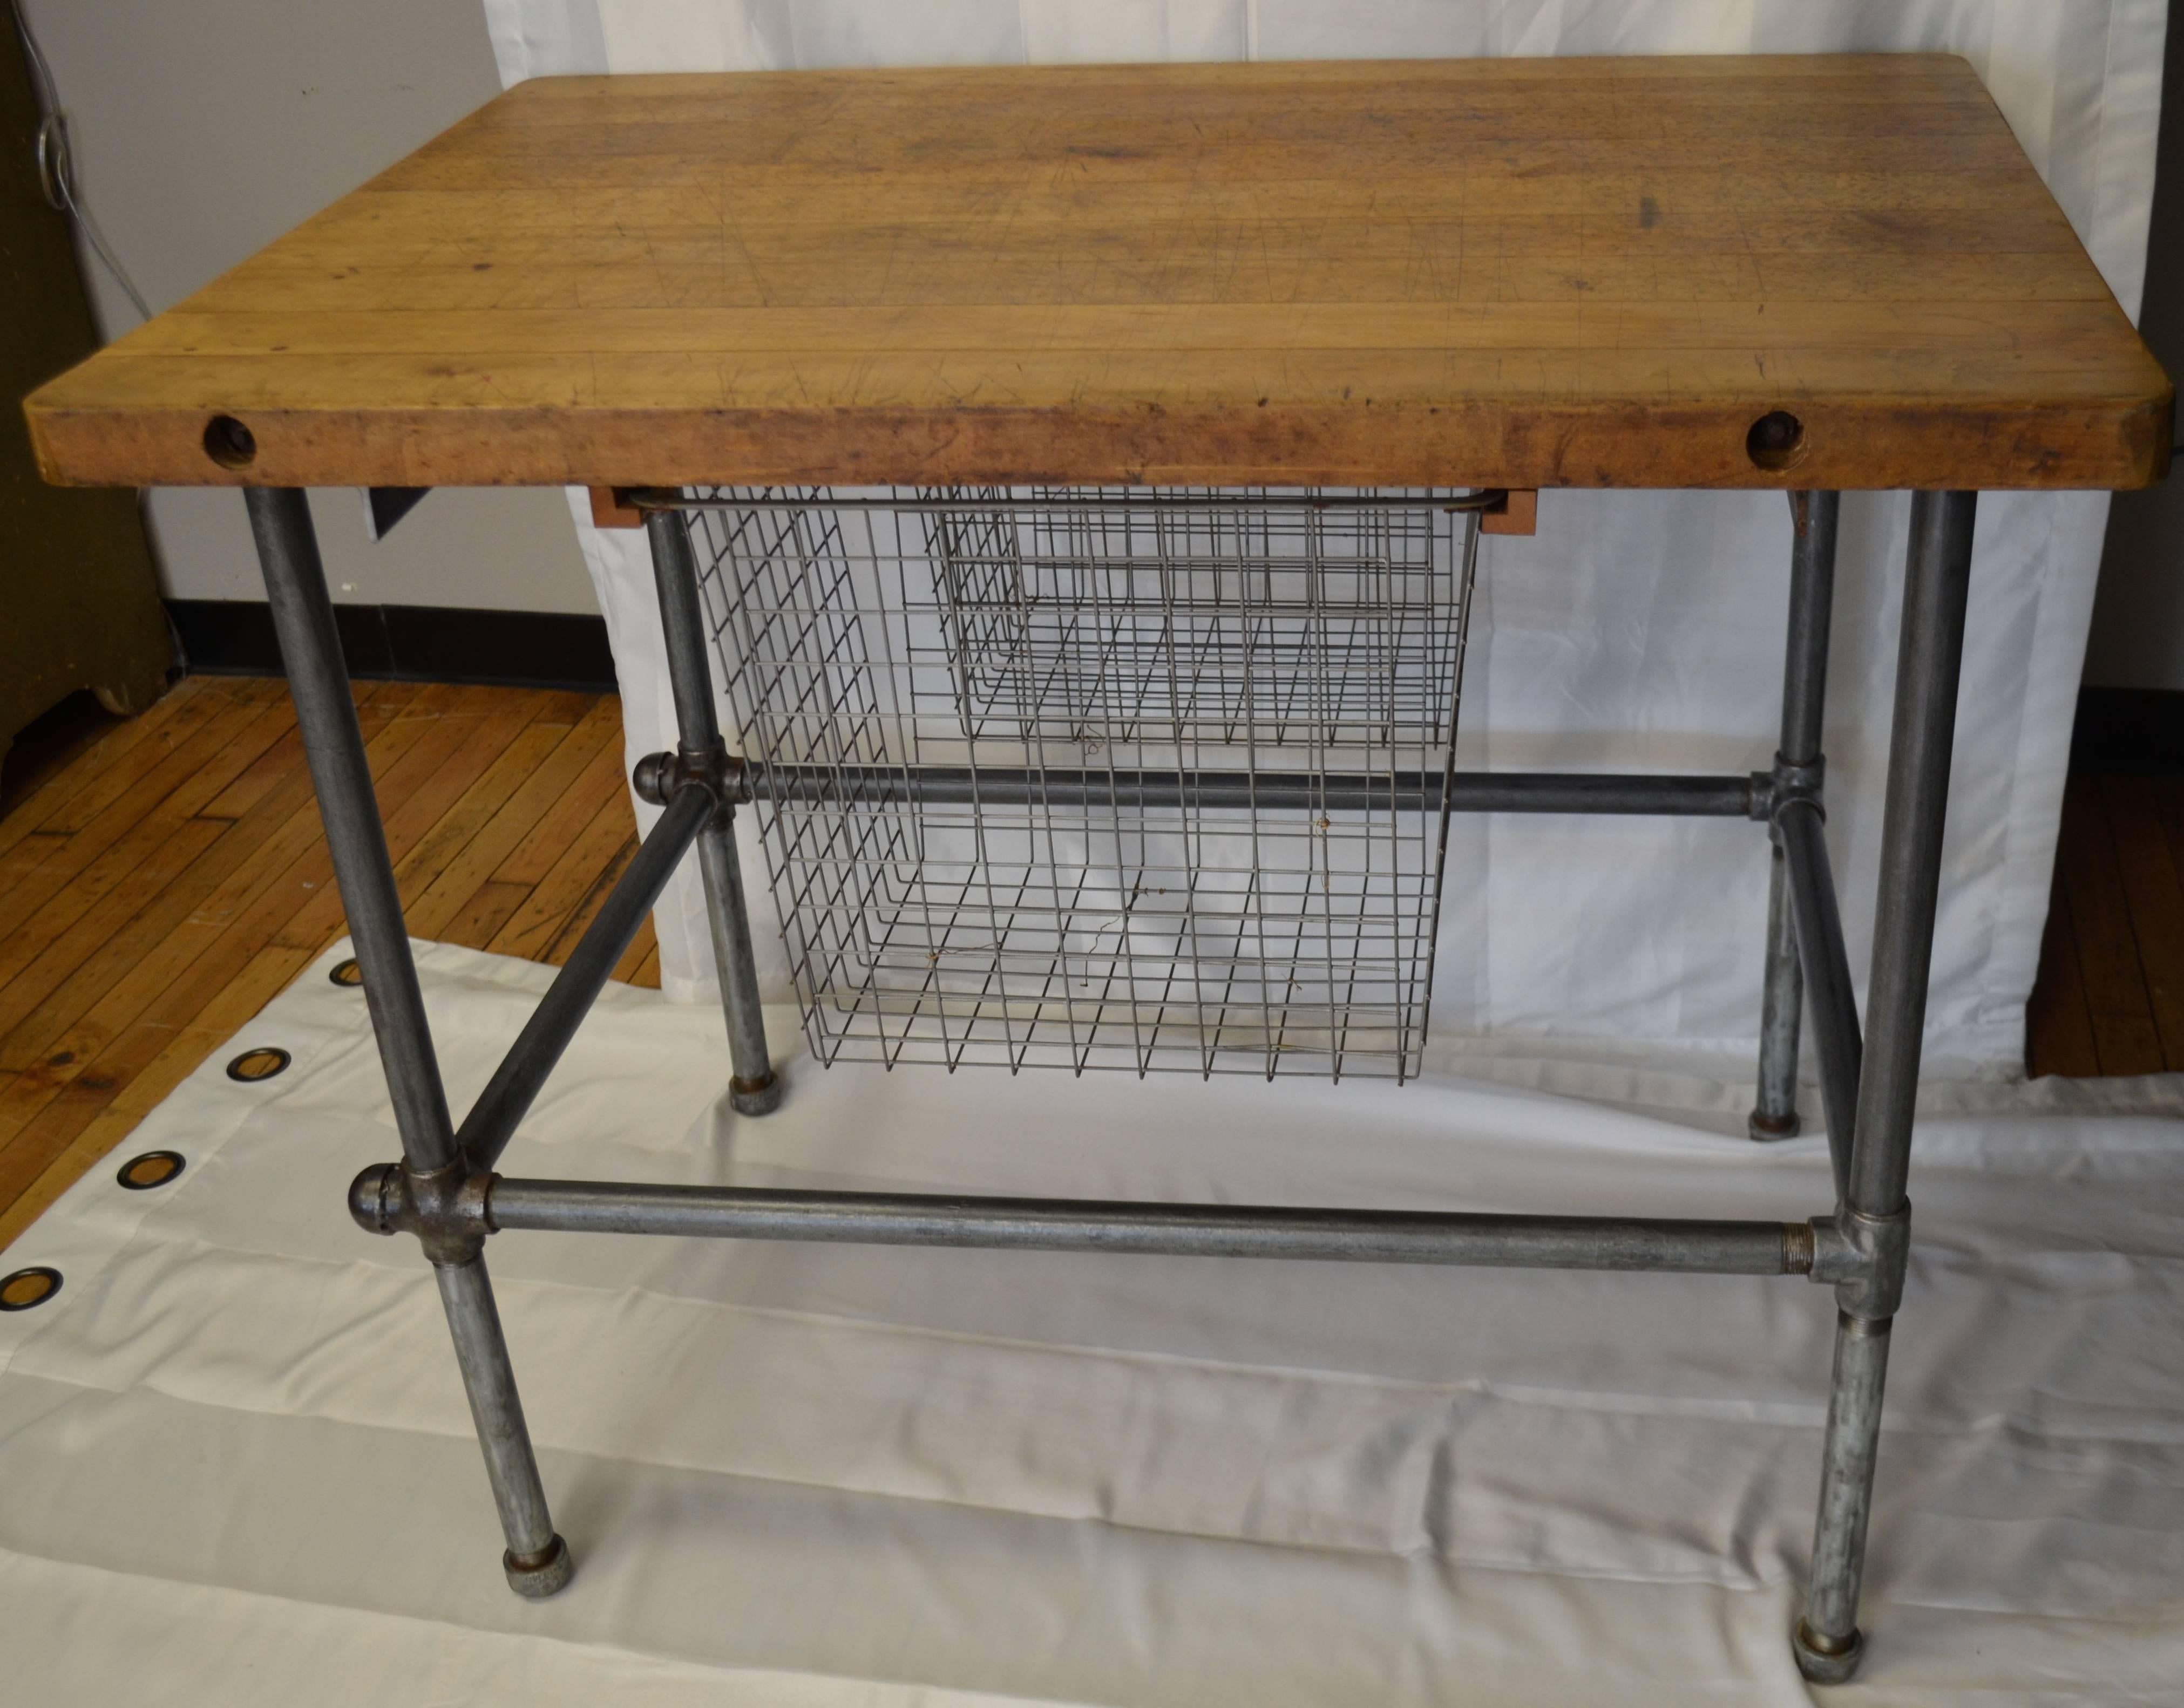 Kitchen island with maple top and two sliding baskets mounted beneath. Sits atop sturdy, interlocking, steel pipe base and legs. Piece is cleaned and sealed to preserve patina of top and legs. Spare, elegant and highly functional.